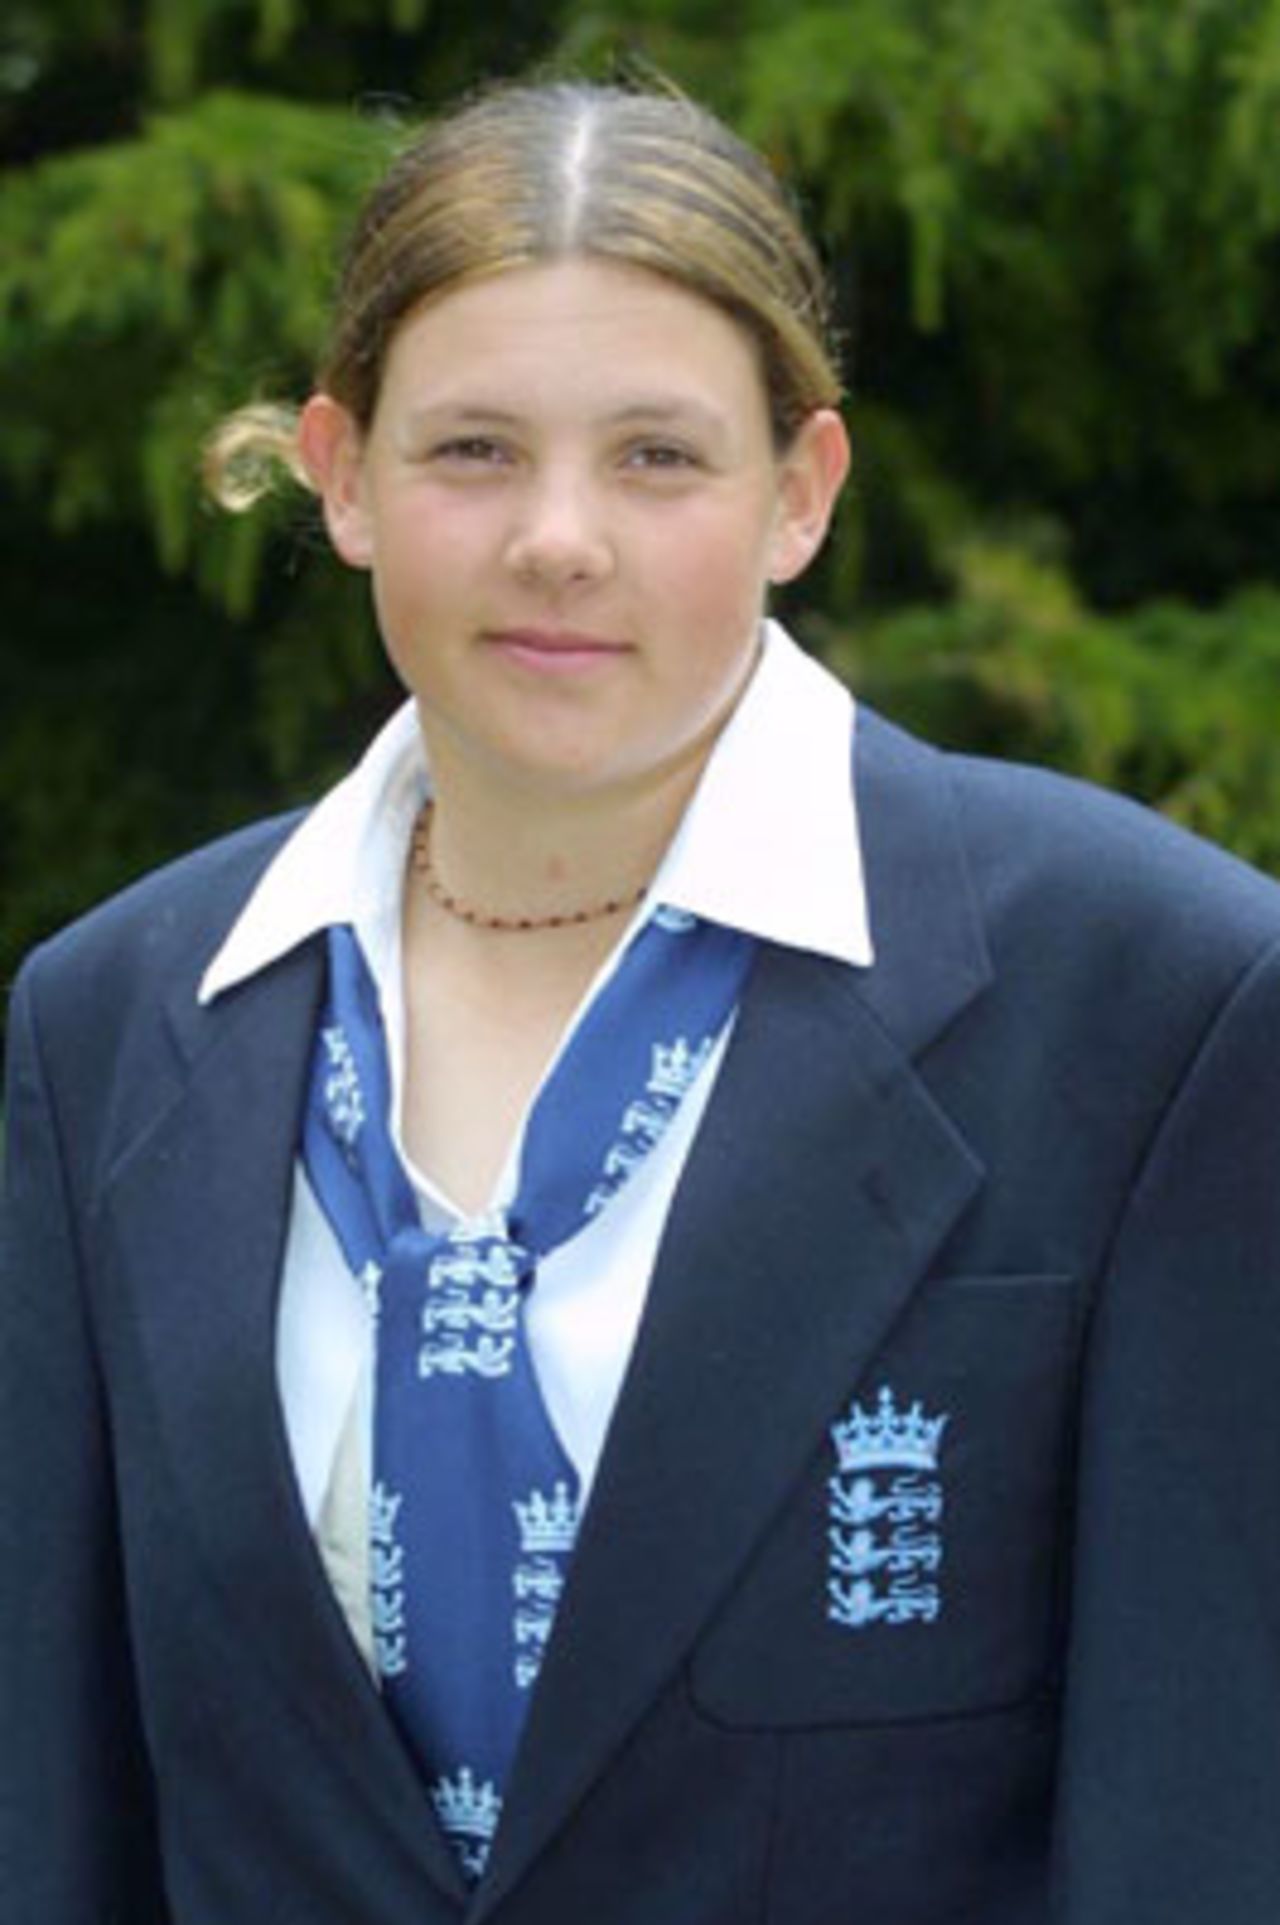 Portrait of Nicki Shaw - England player in the CricInfo Women's World Cup 2000